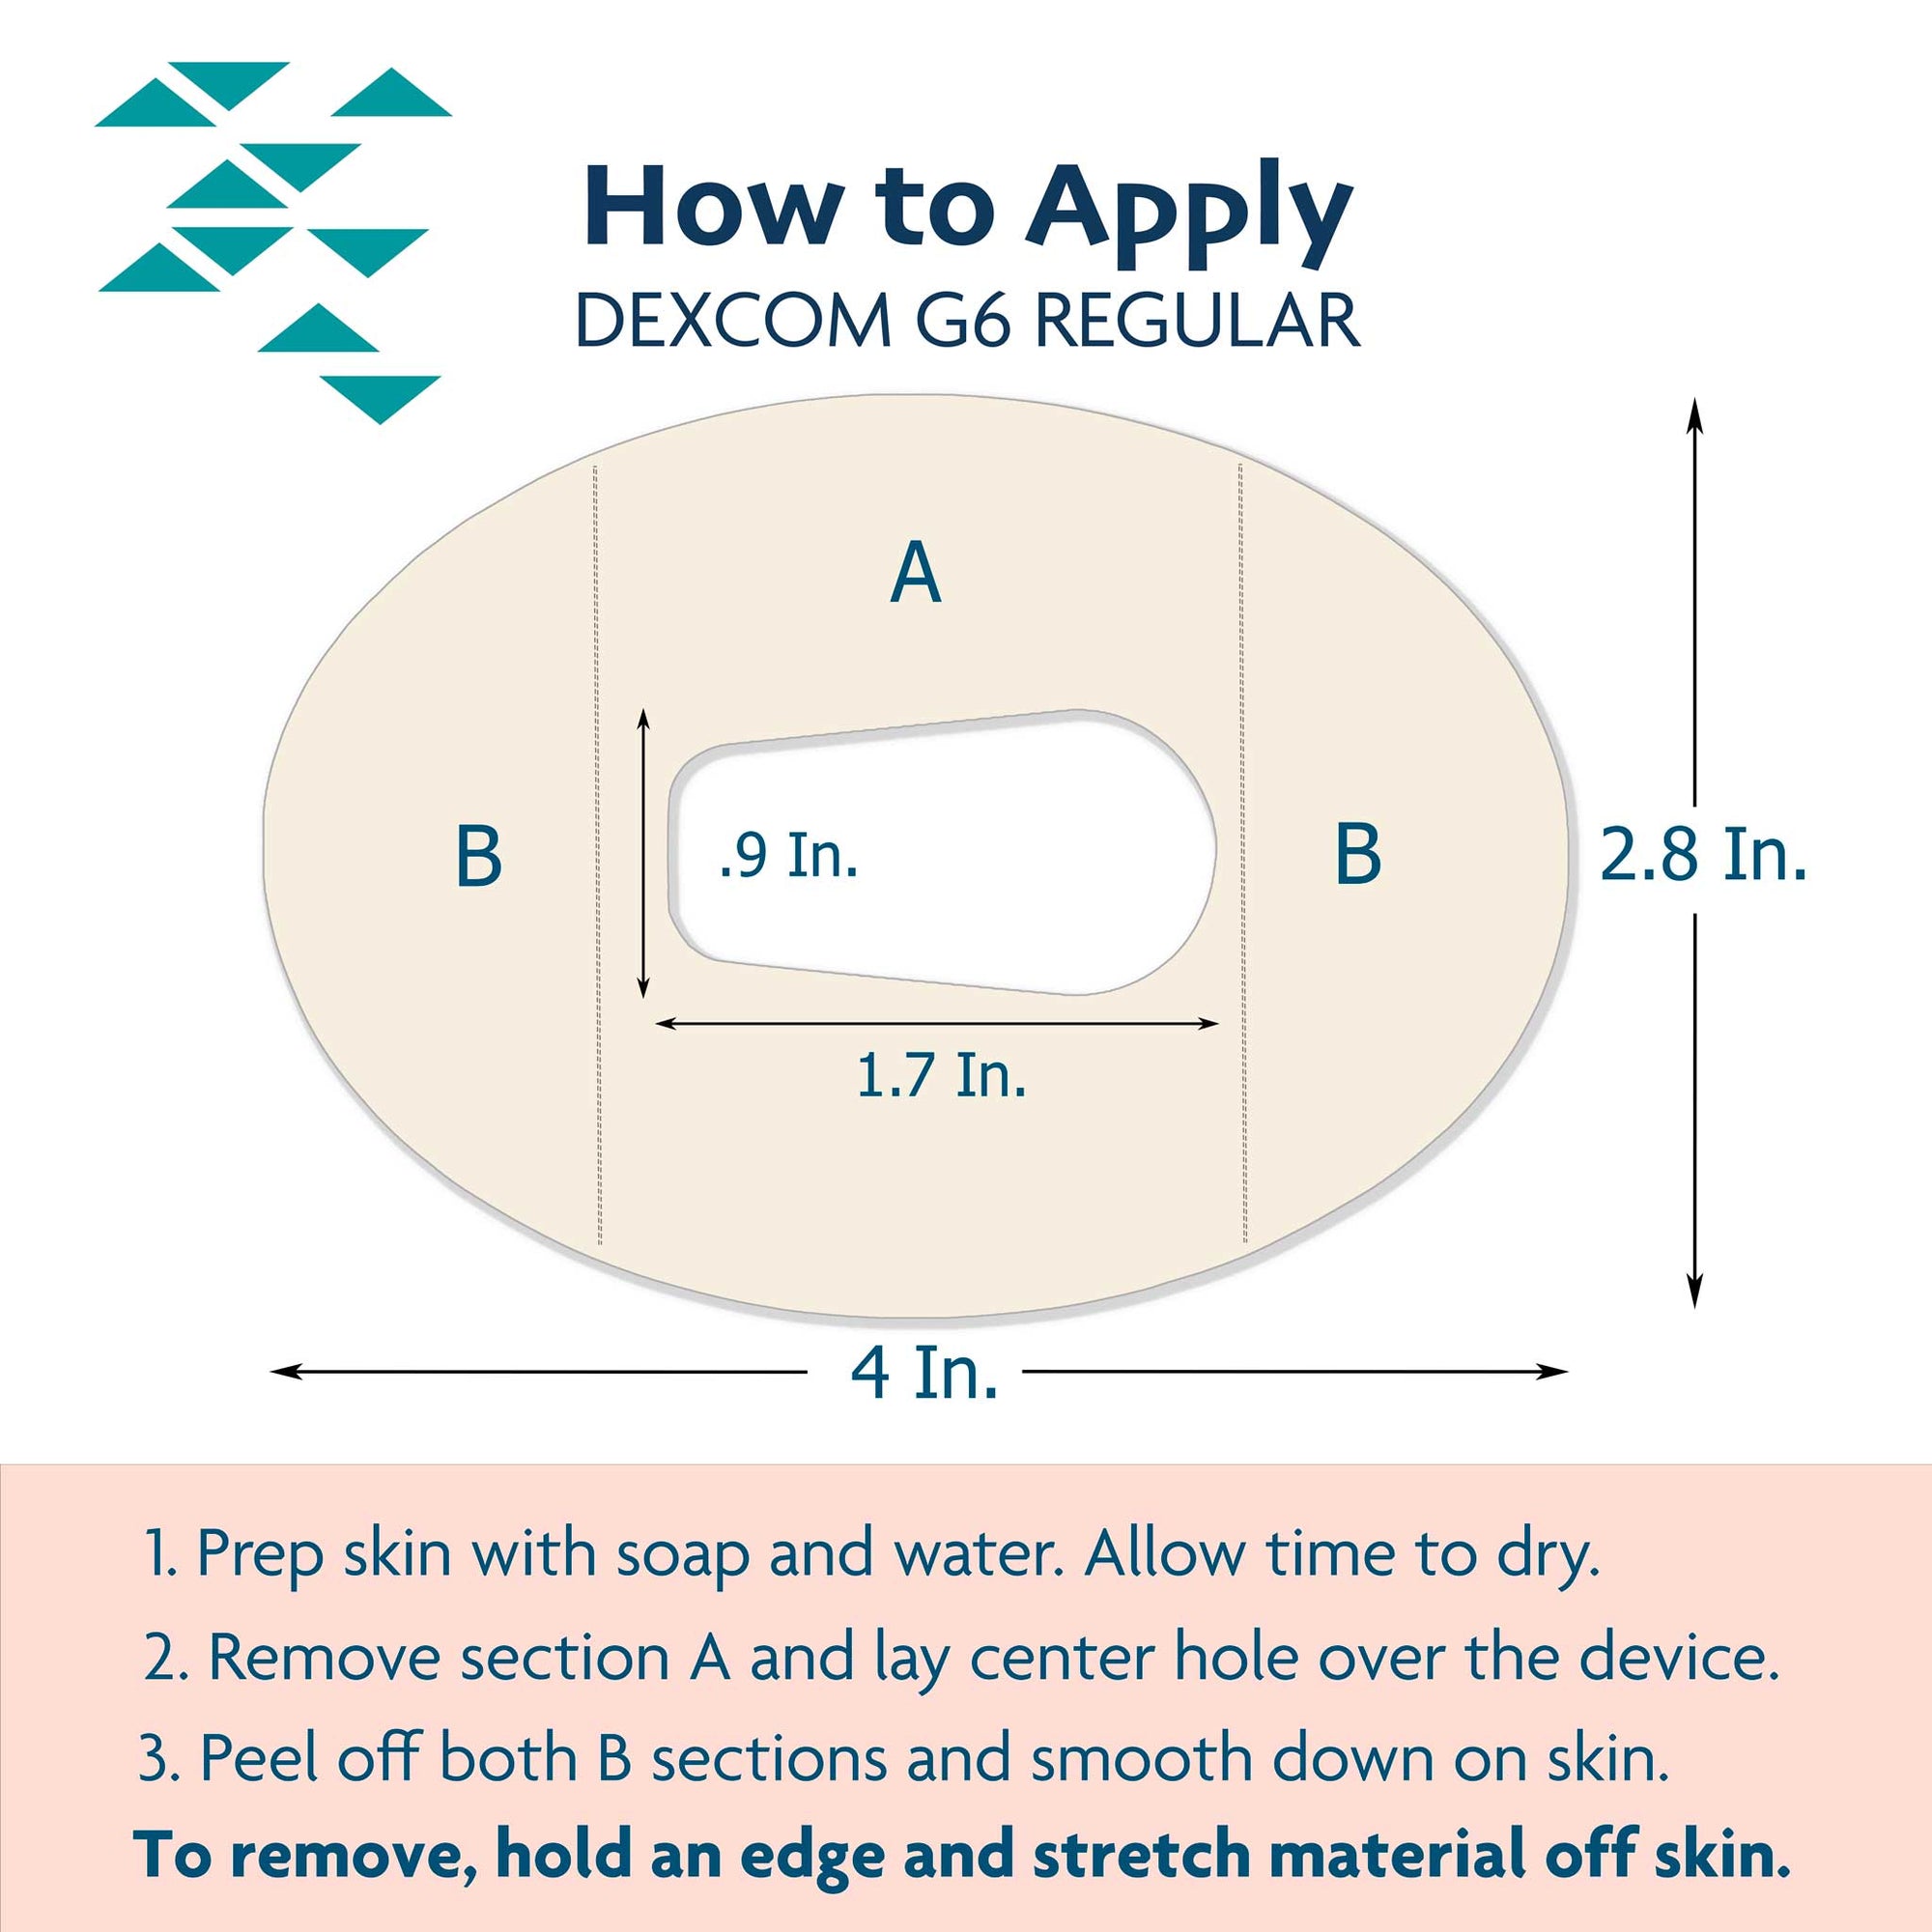 Tape application guide for Dexcom G6 monitor device